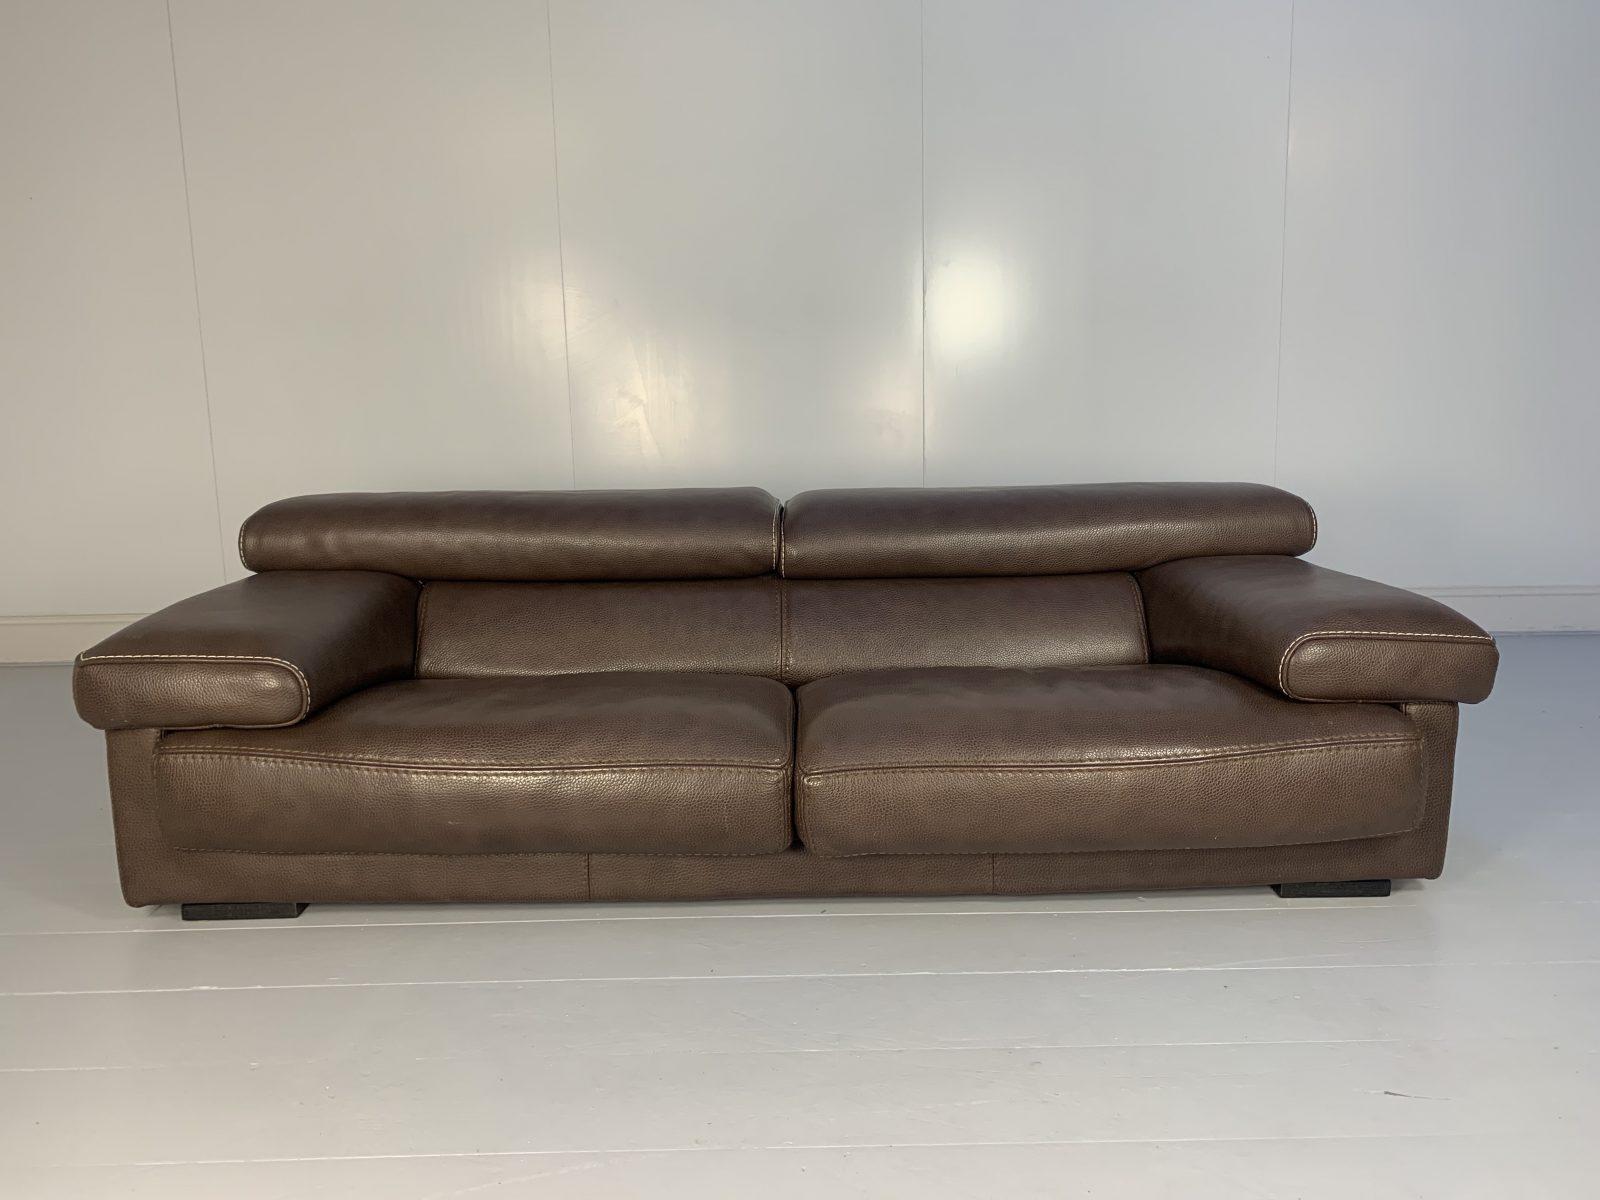 This is quite possibly the last leather sofa you might ever need buy. The piece in question is a gorgeous, sensationally-proportioned large 3-Seat Sofa with multi-position backrest from the world renown French furniture house of Roche Bobois,